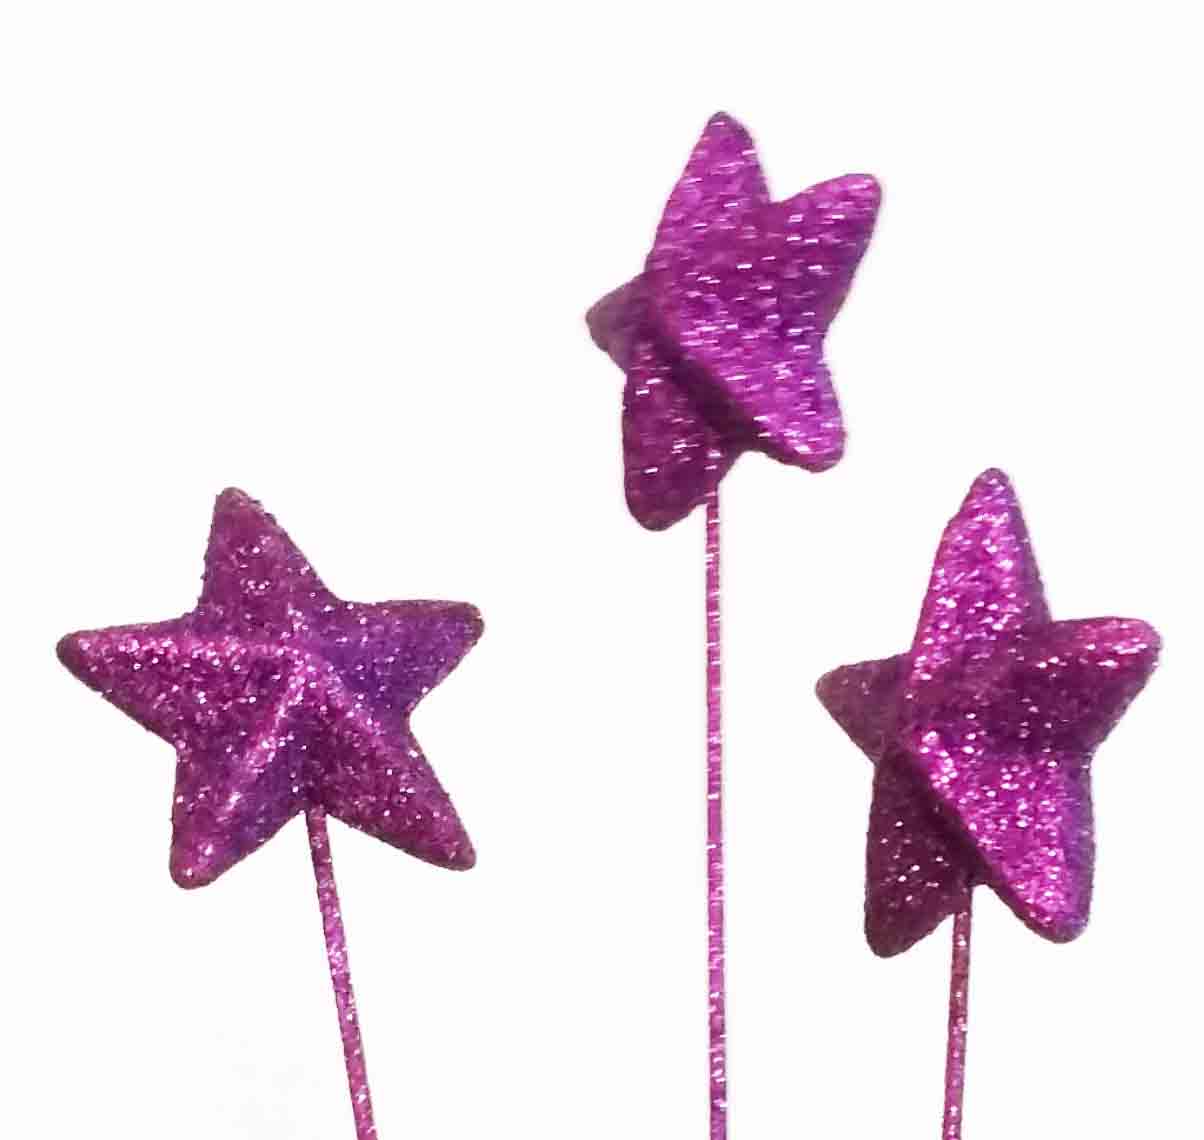 X3809 - 18" Glittered Star on a Stick - 2.50 bunch of 10